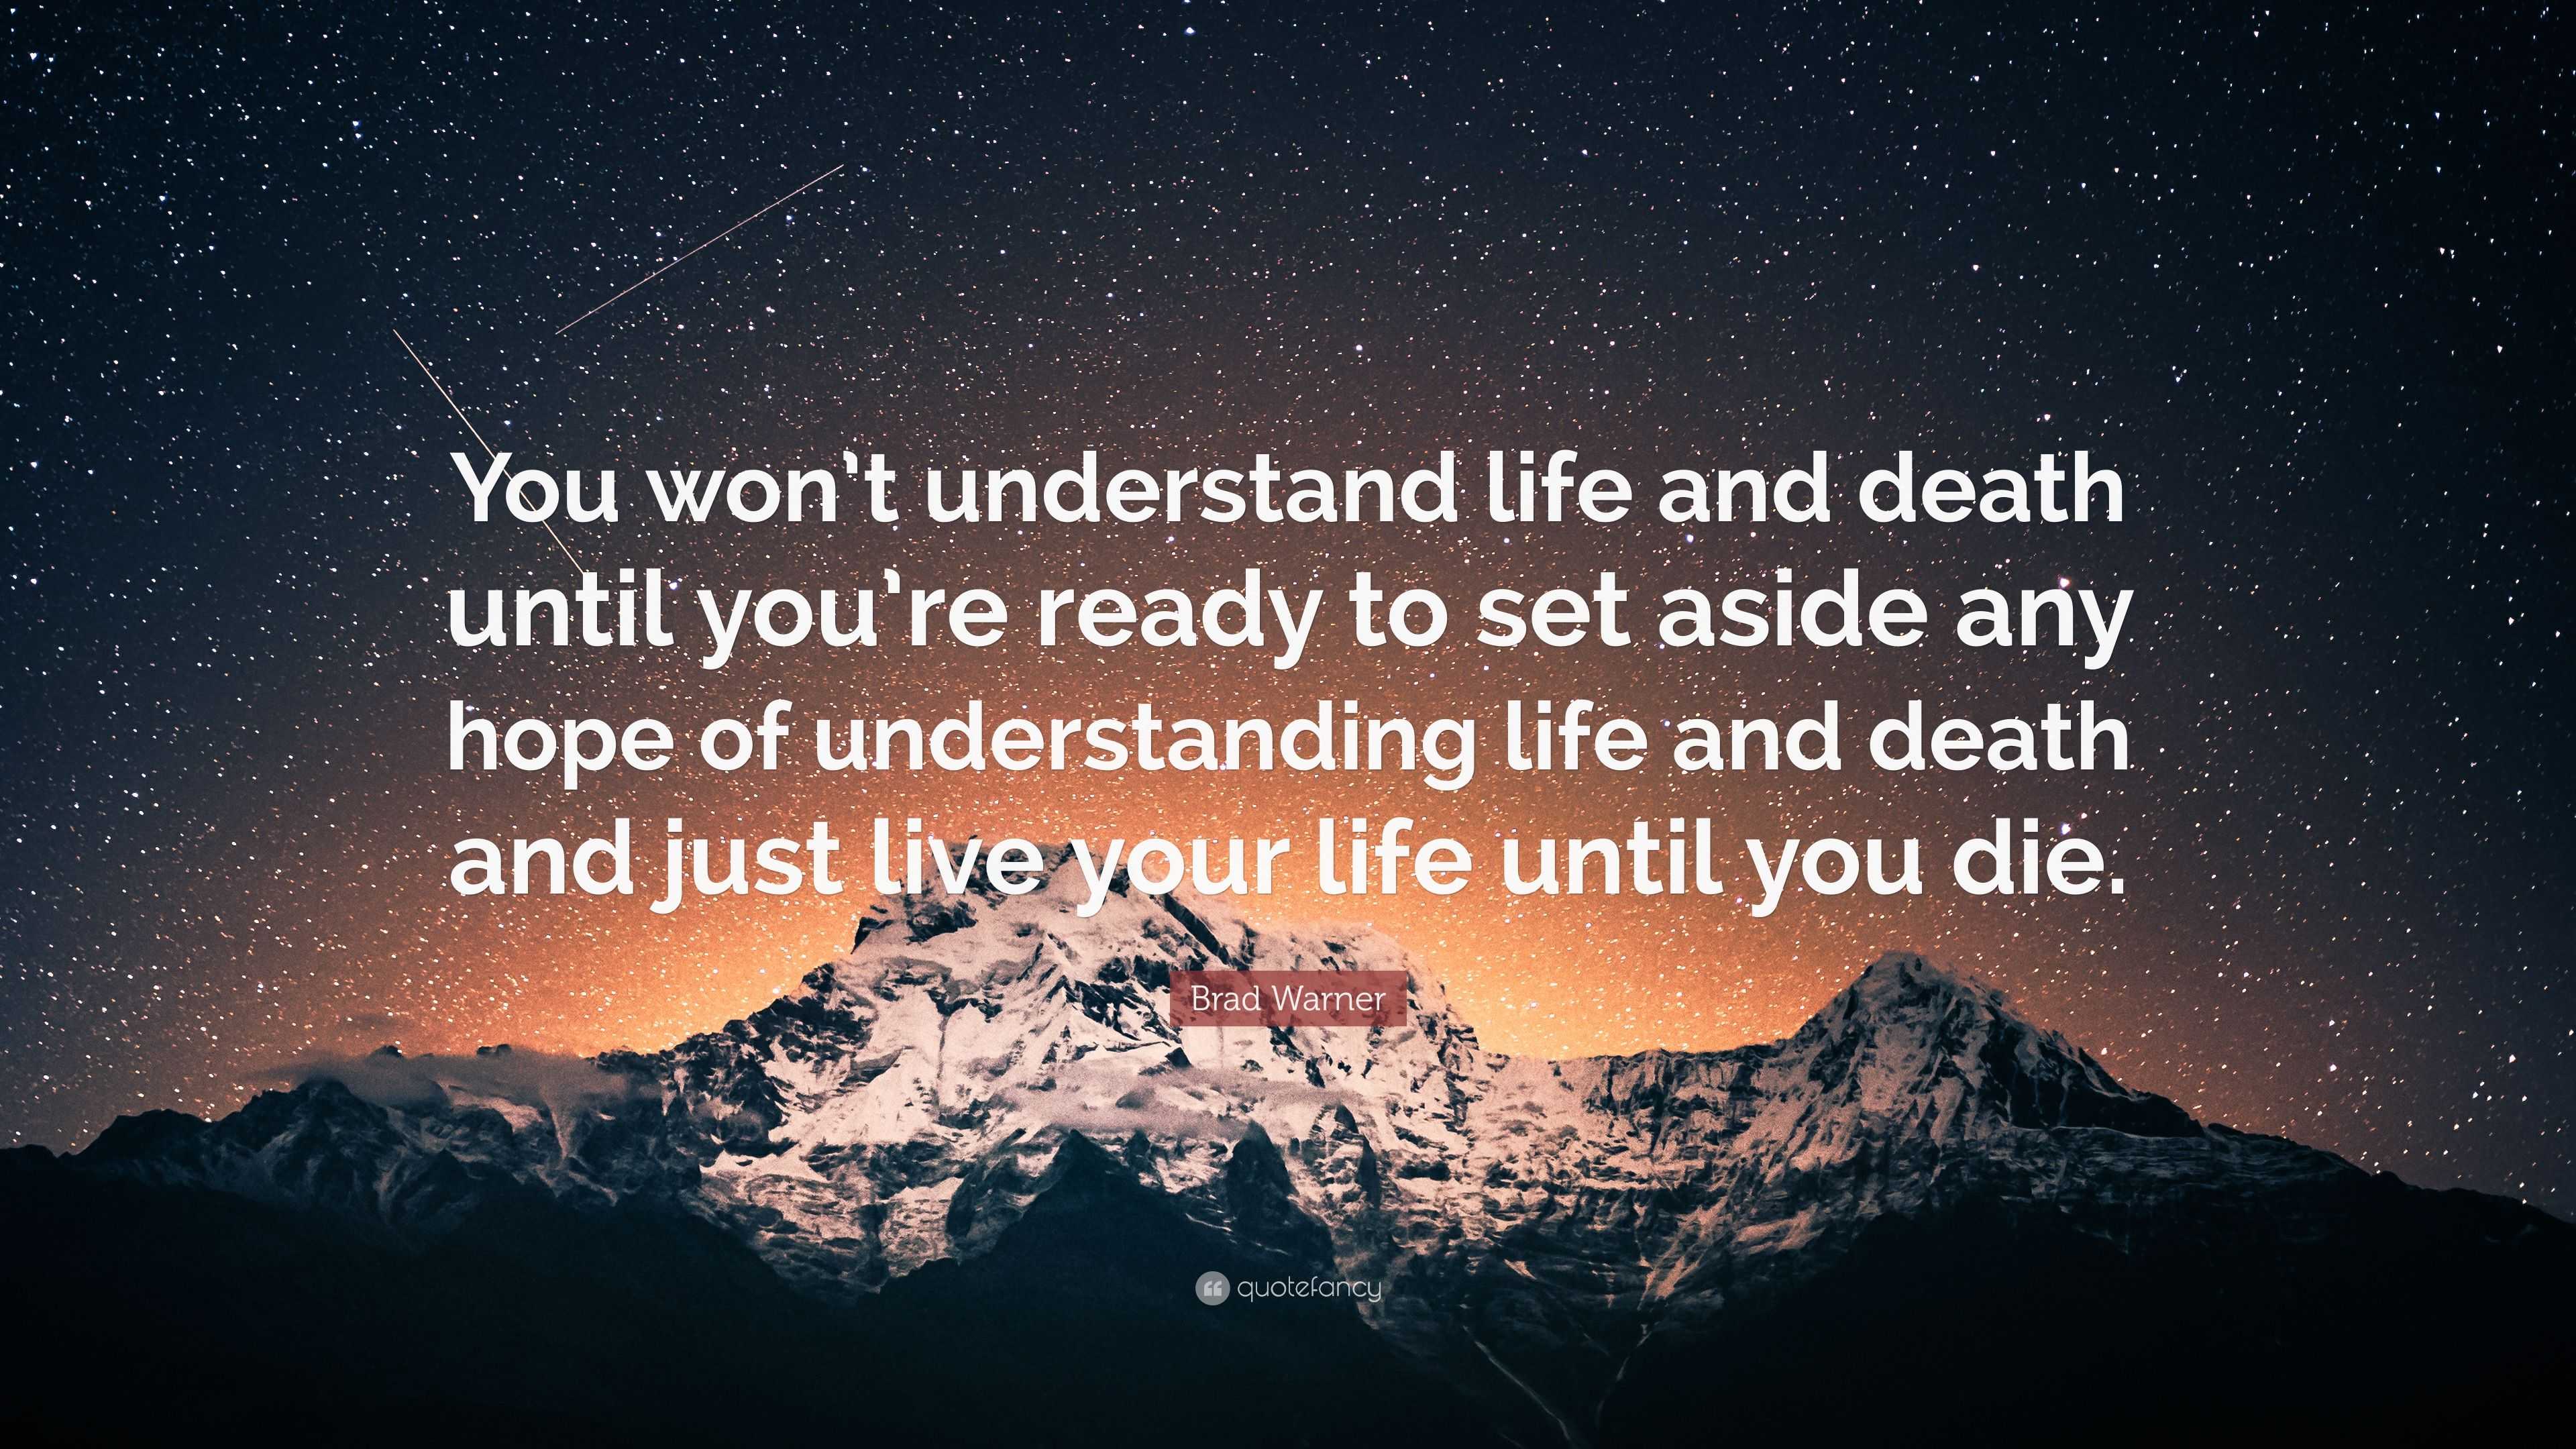 Brad Warner Quote: “You won’t understand life and death until you’re ...